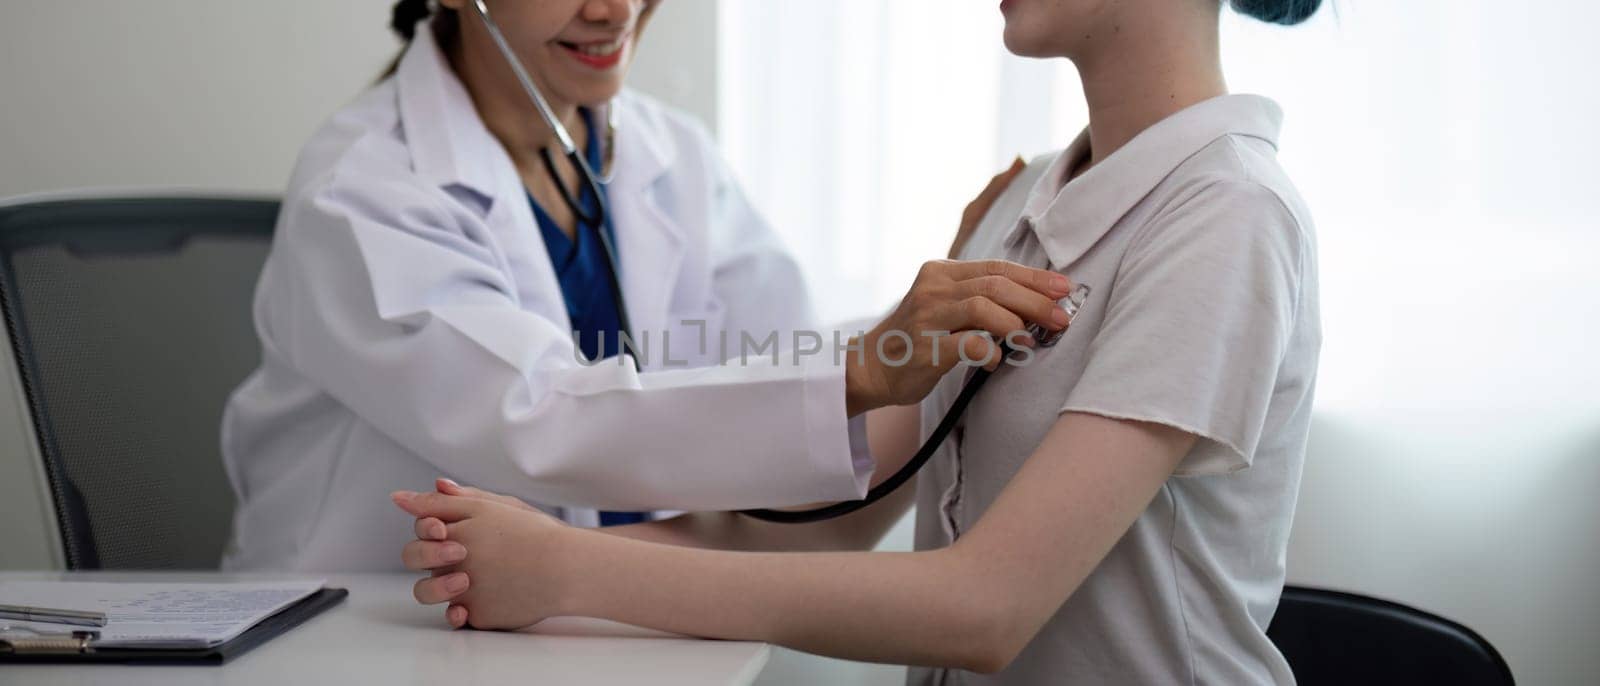 Asian woman elderly doctor at hospital taking care of young woman. Doctor measure heart rate by stethoscope on older patient. Medical insurance service concept.